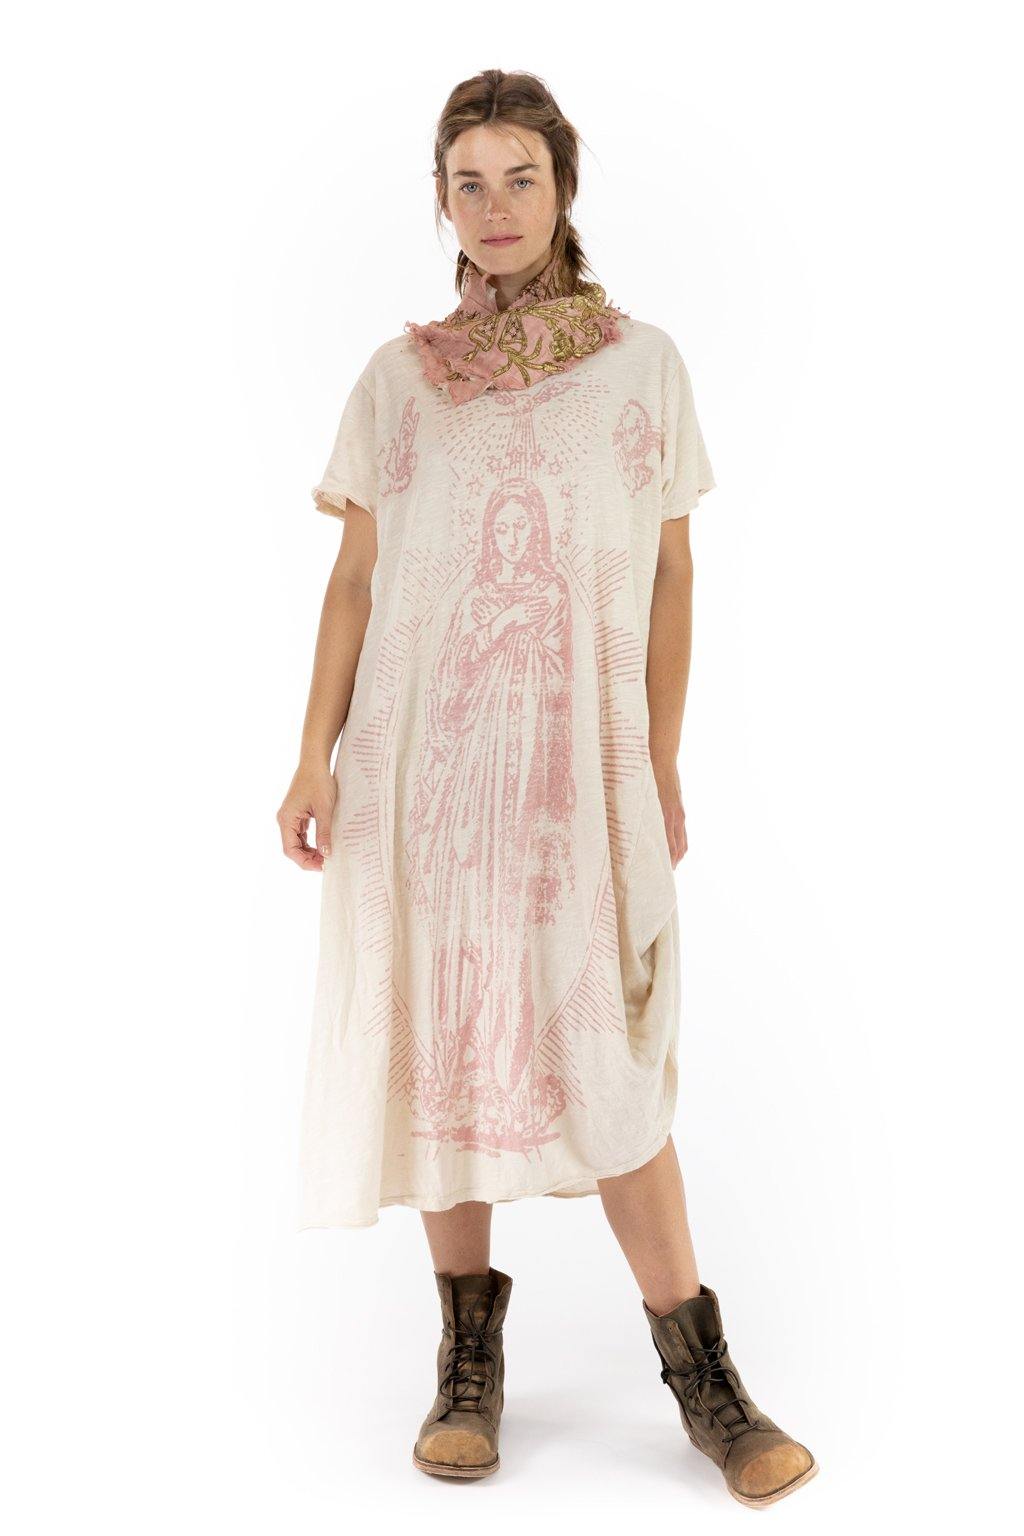 Mary of Prosperity T Dress by Magnolia Pearl